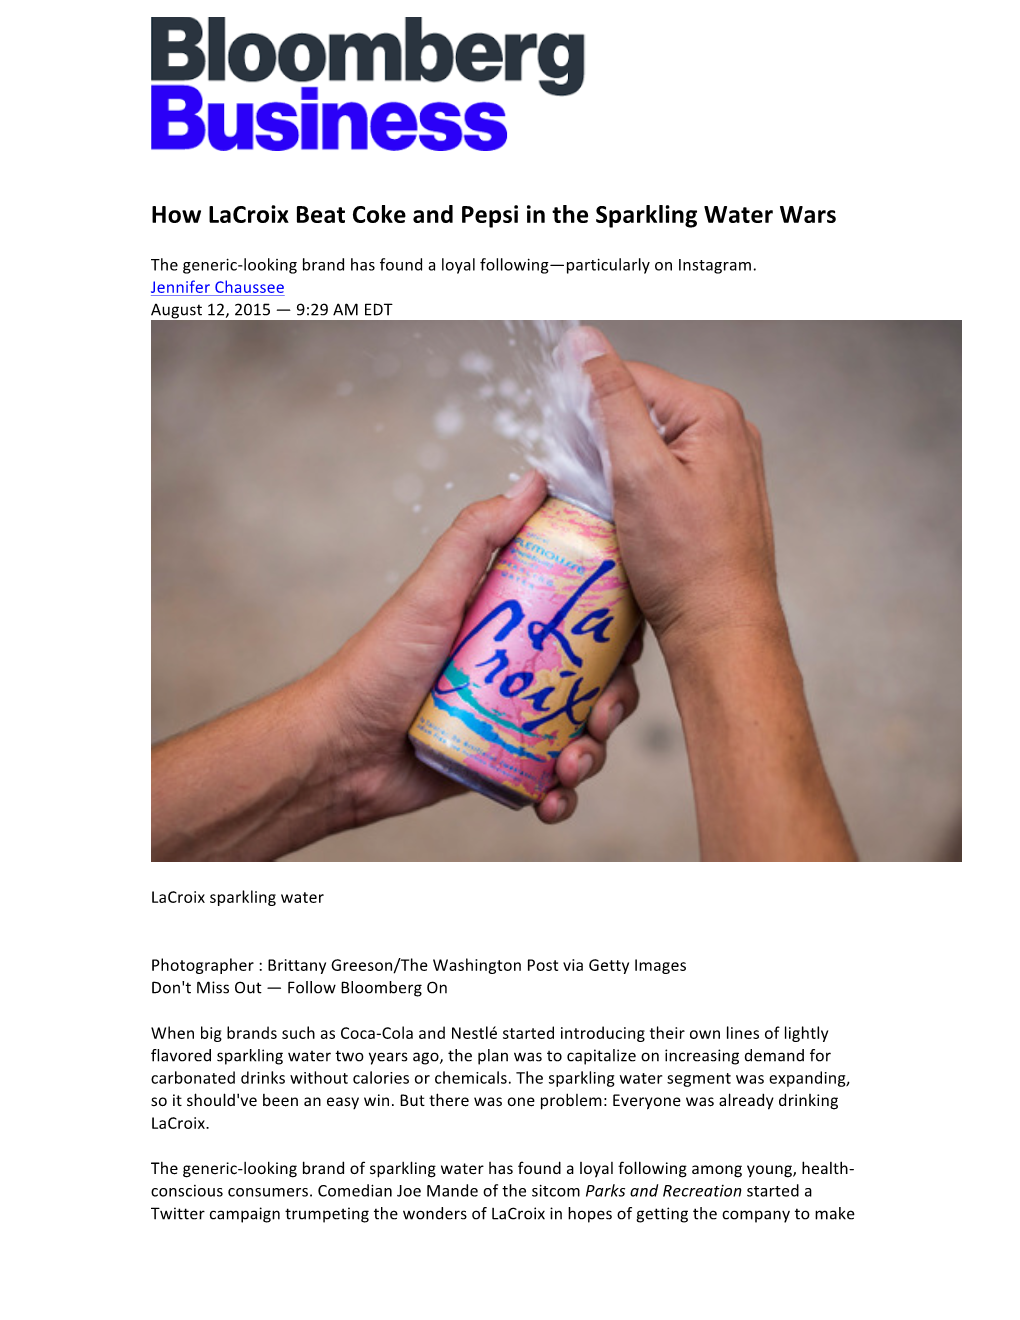 How Lacroix Beat Coke and Pepsi in the Sparkling Water Wars